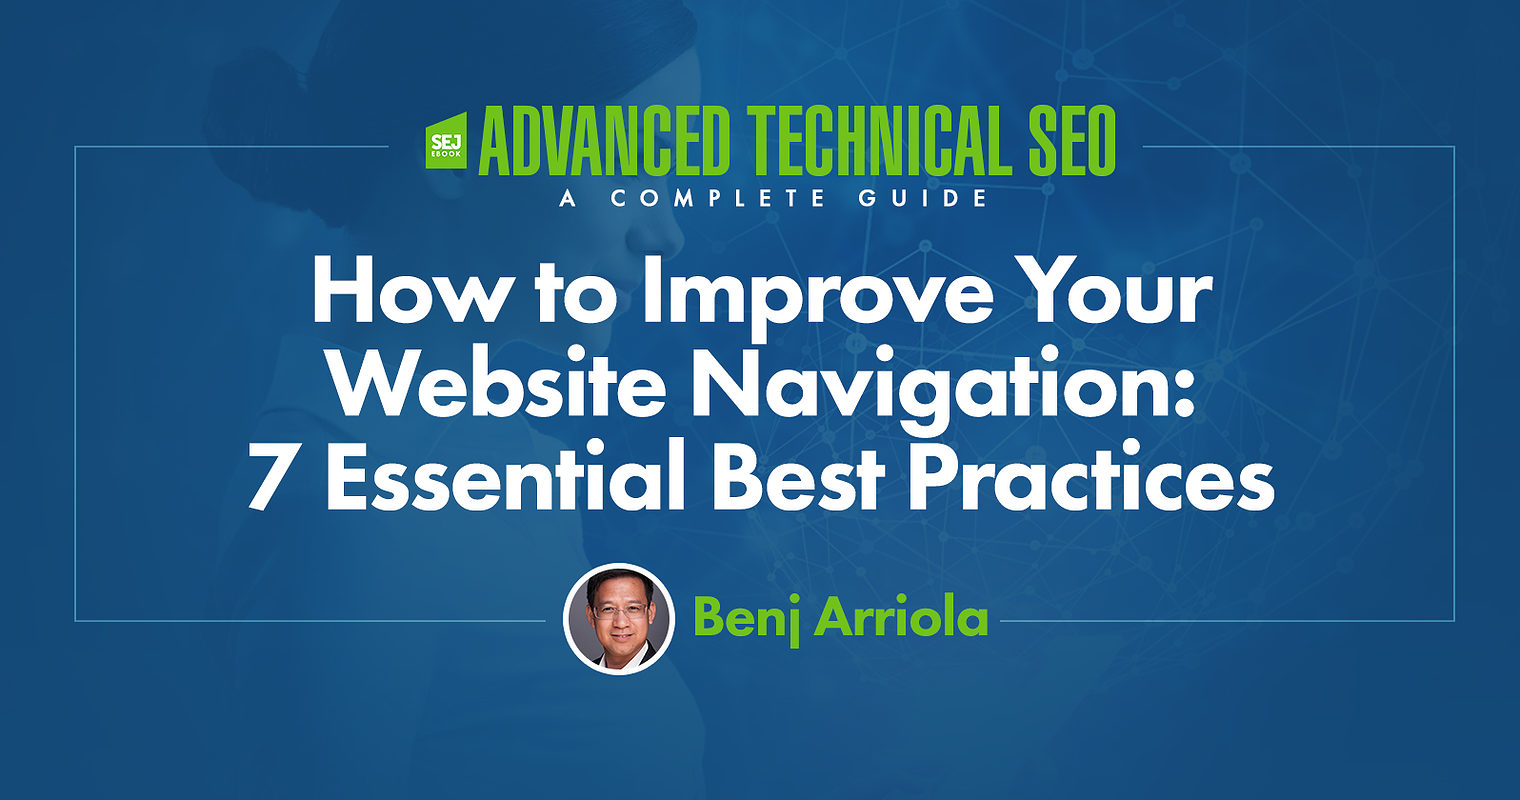 How to Improve Your Website Navigation: 7 Essential Best Practices